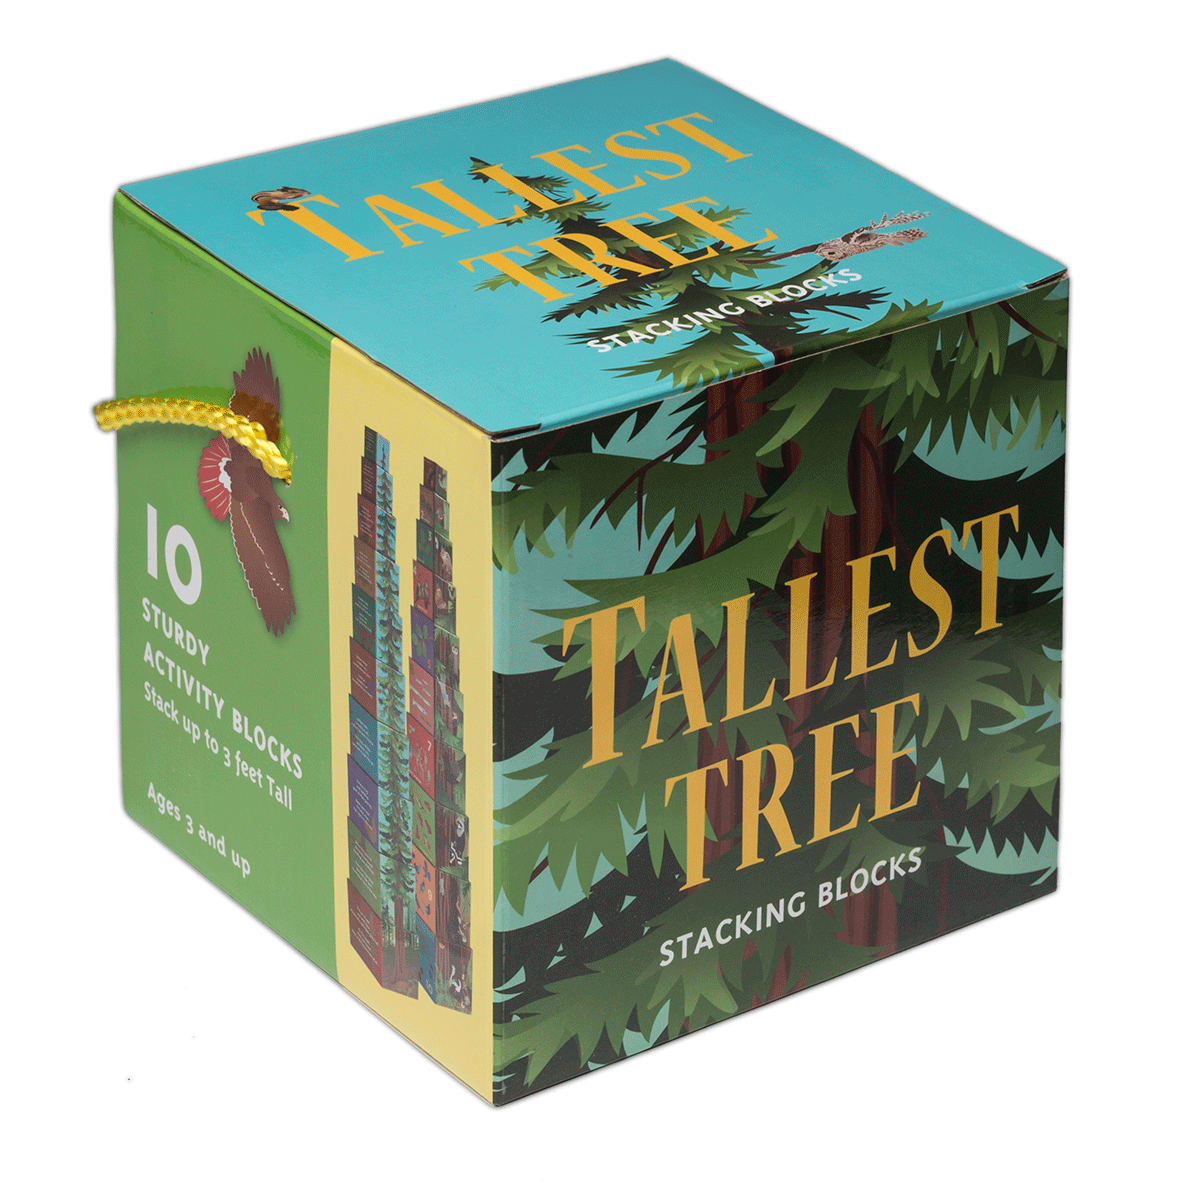 Gift box for tallest tree stacking blocks, with colorful illustrations of redwood forest. Text reads name of product and "10 sturdy activity blocks stack up to 3 feet tall Ages 3 and up".